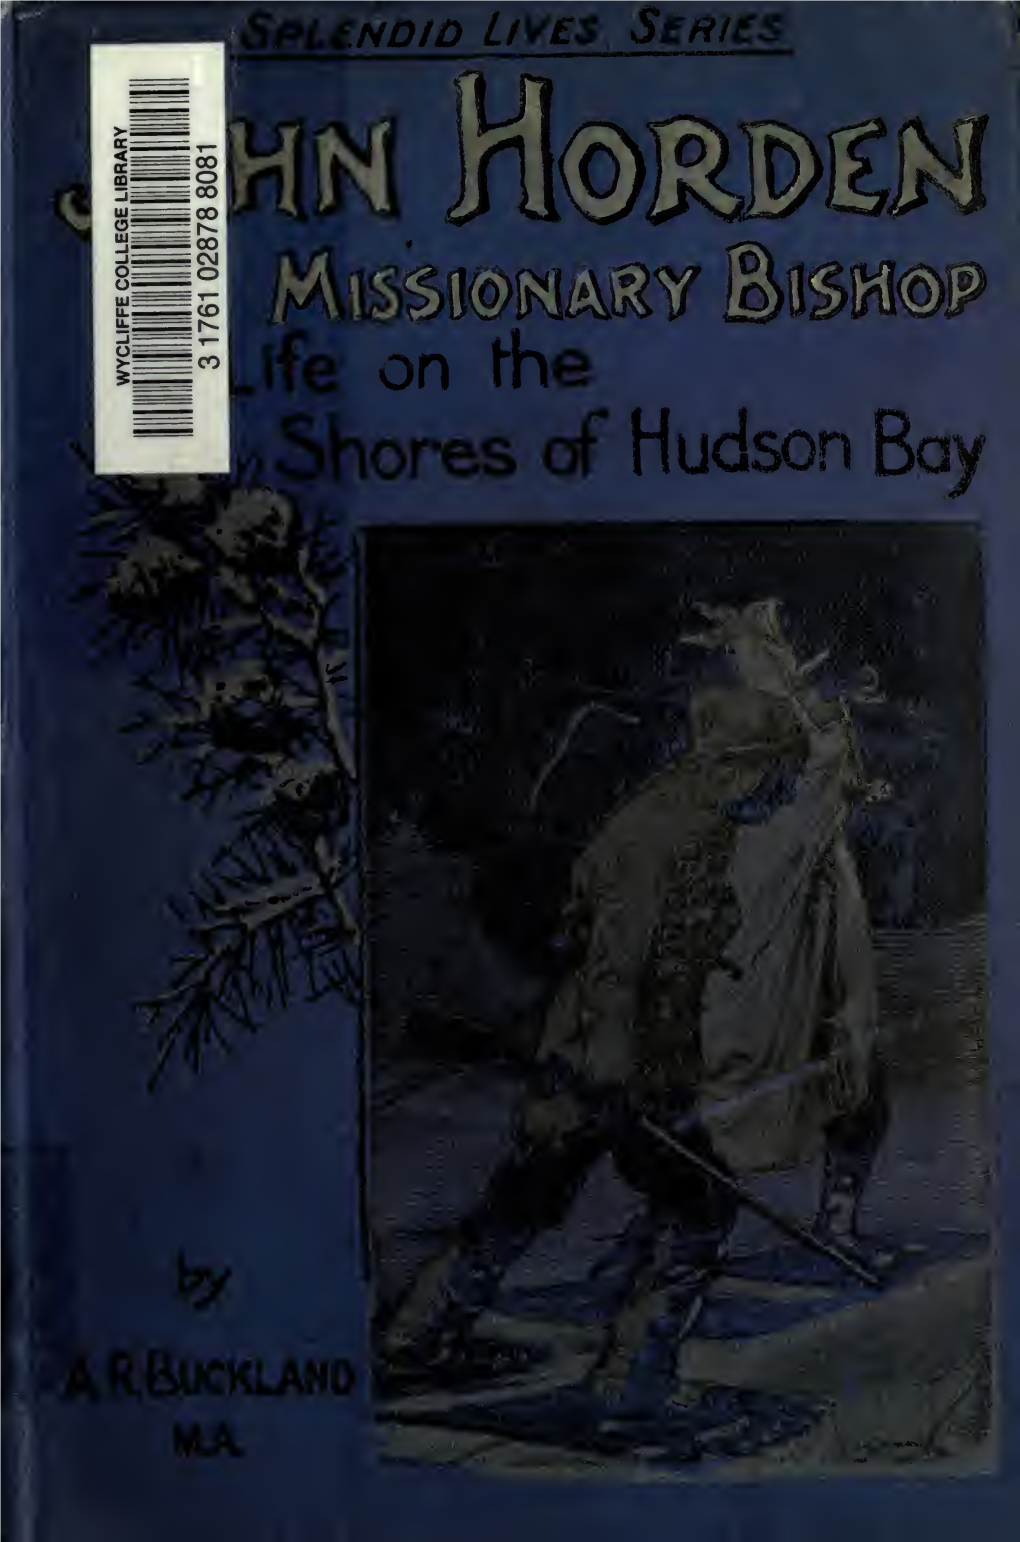 John Horden, Missionary Bishop : a Life on The